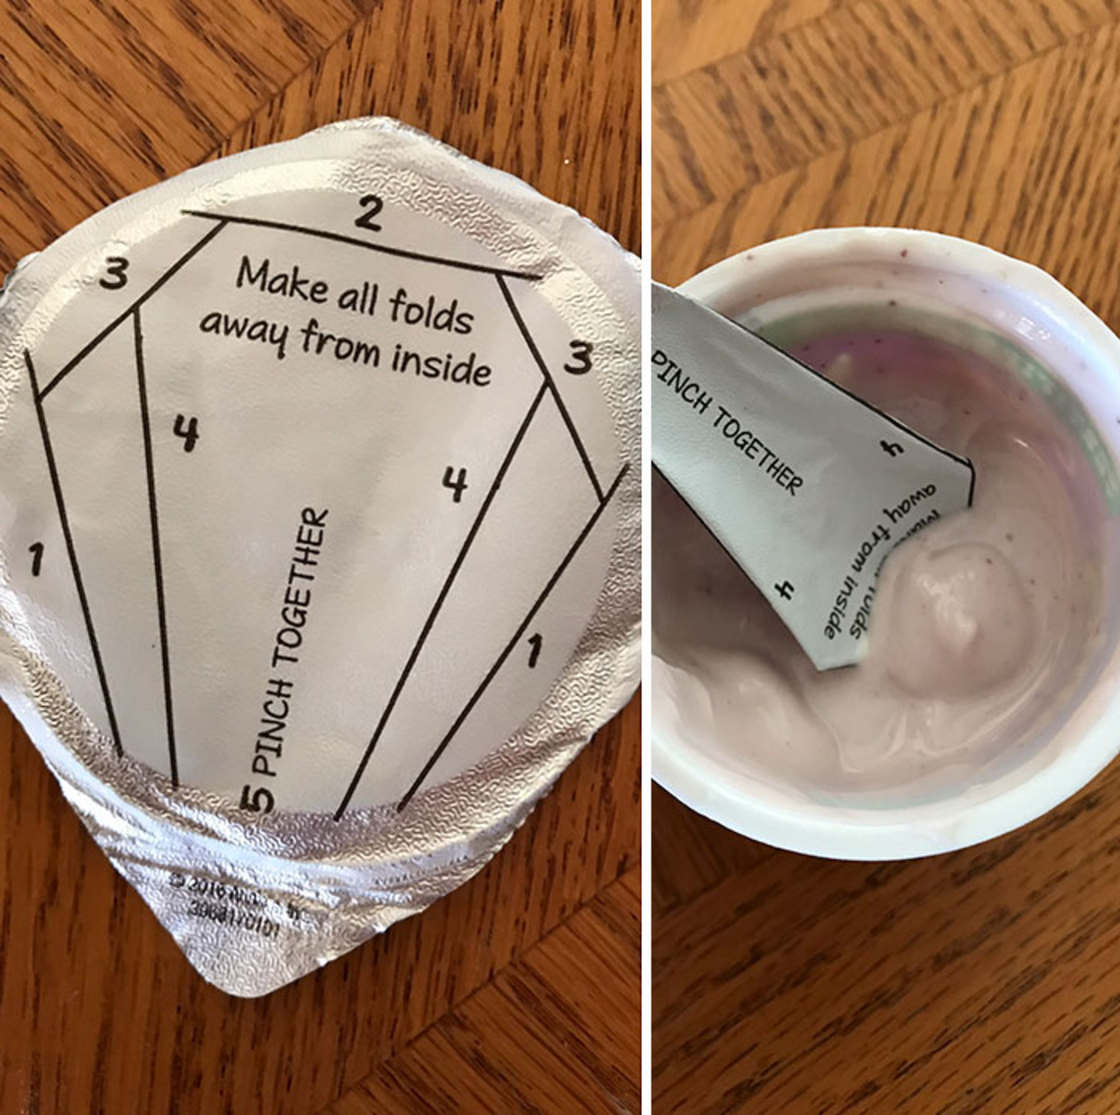 Yogurt with instuctions on the metal lid on how to use it as a spoon by folding it.